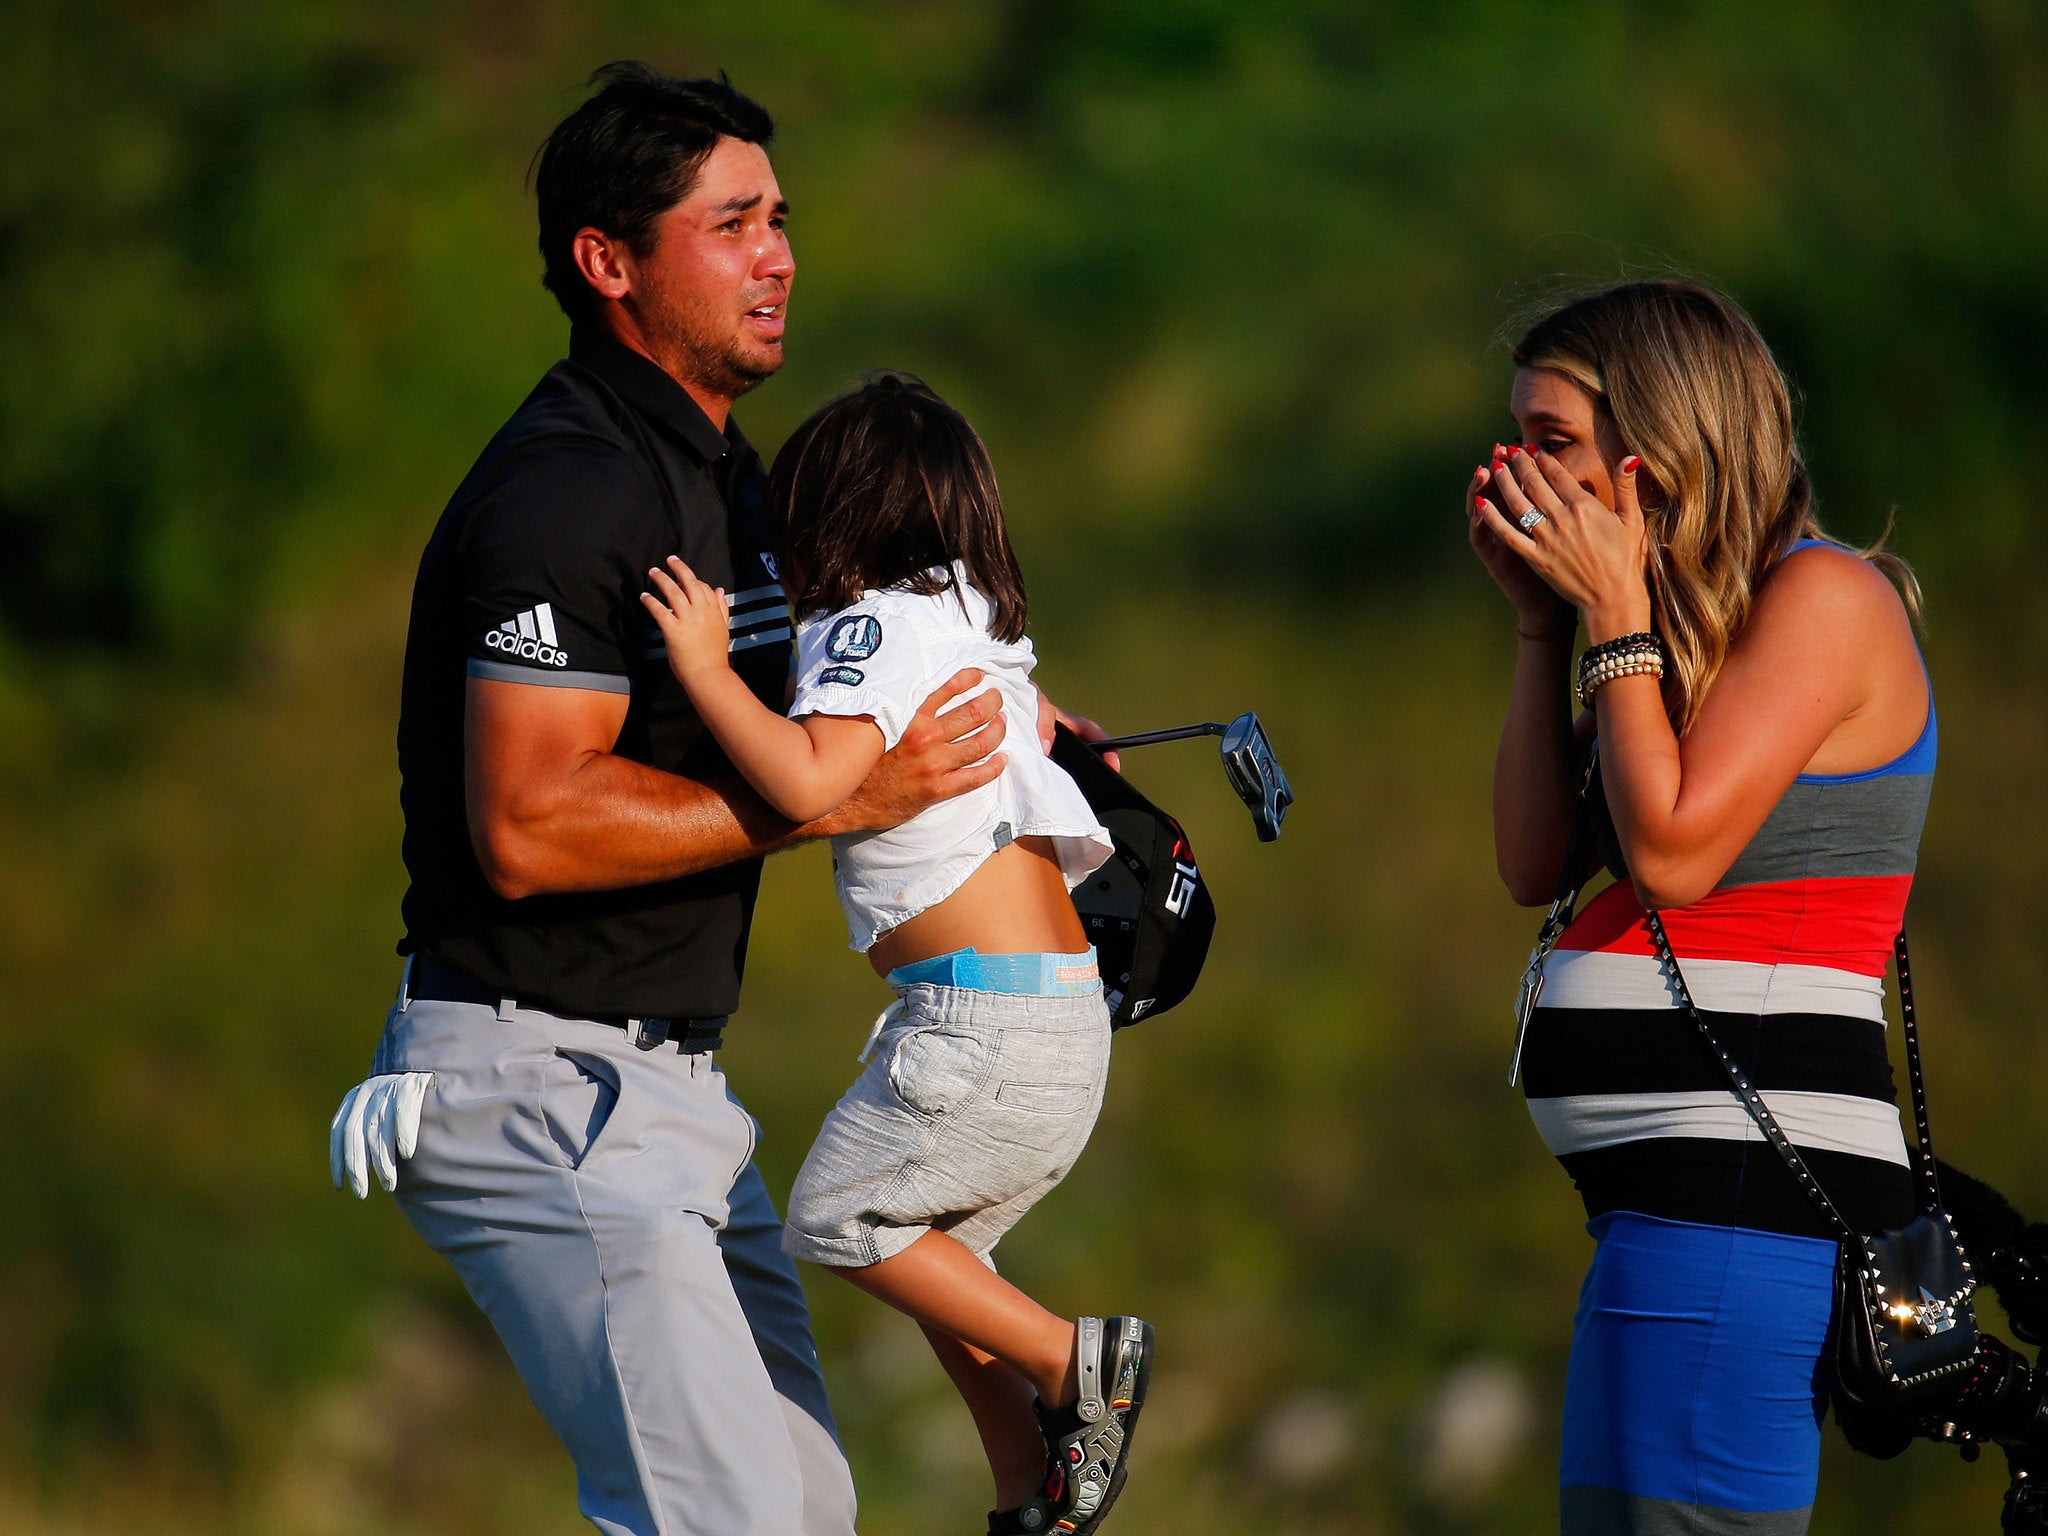 The 27-year-old was in tears even before tapping in for par on the 18th